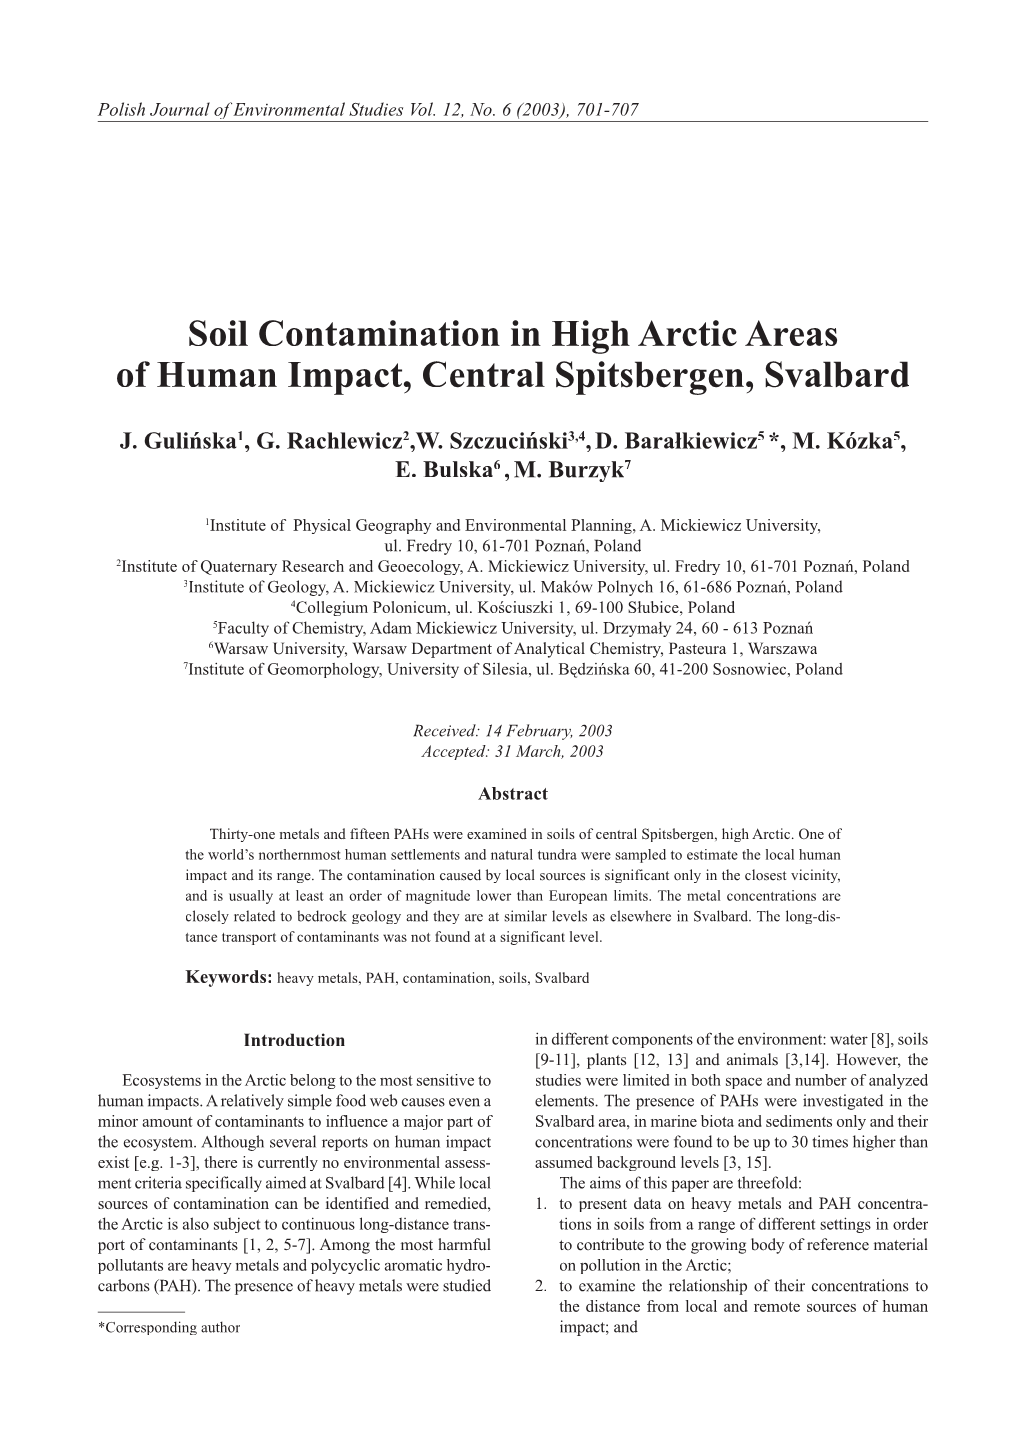 Soil Contamination in High Arctic Areas of Human Impact, Central Spitsbergen, Svalbard